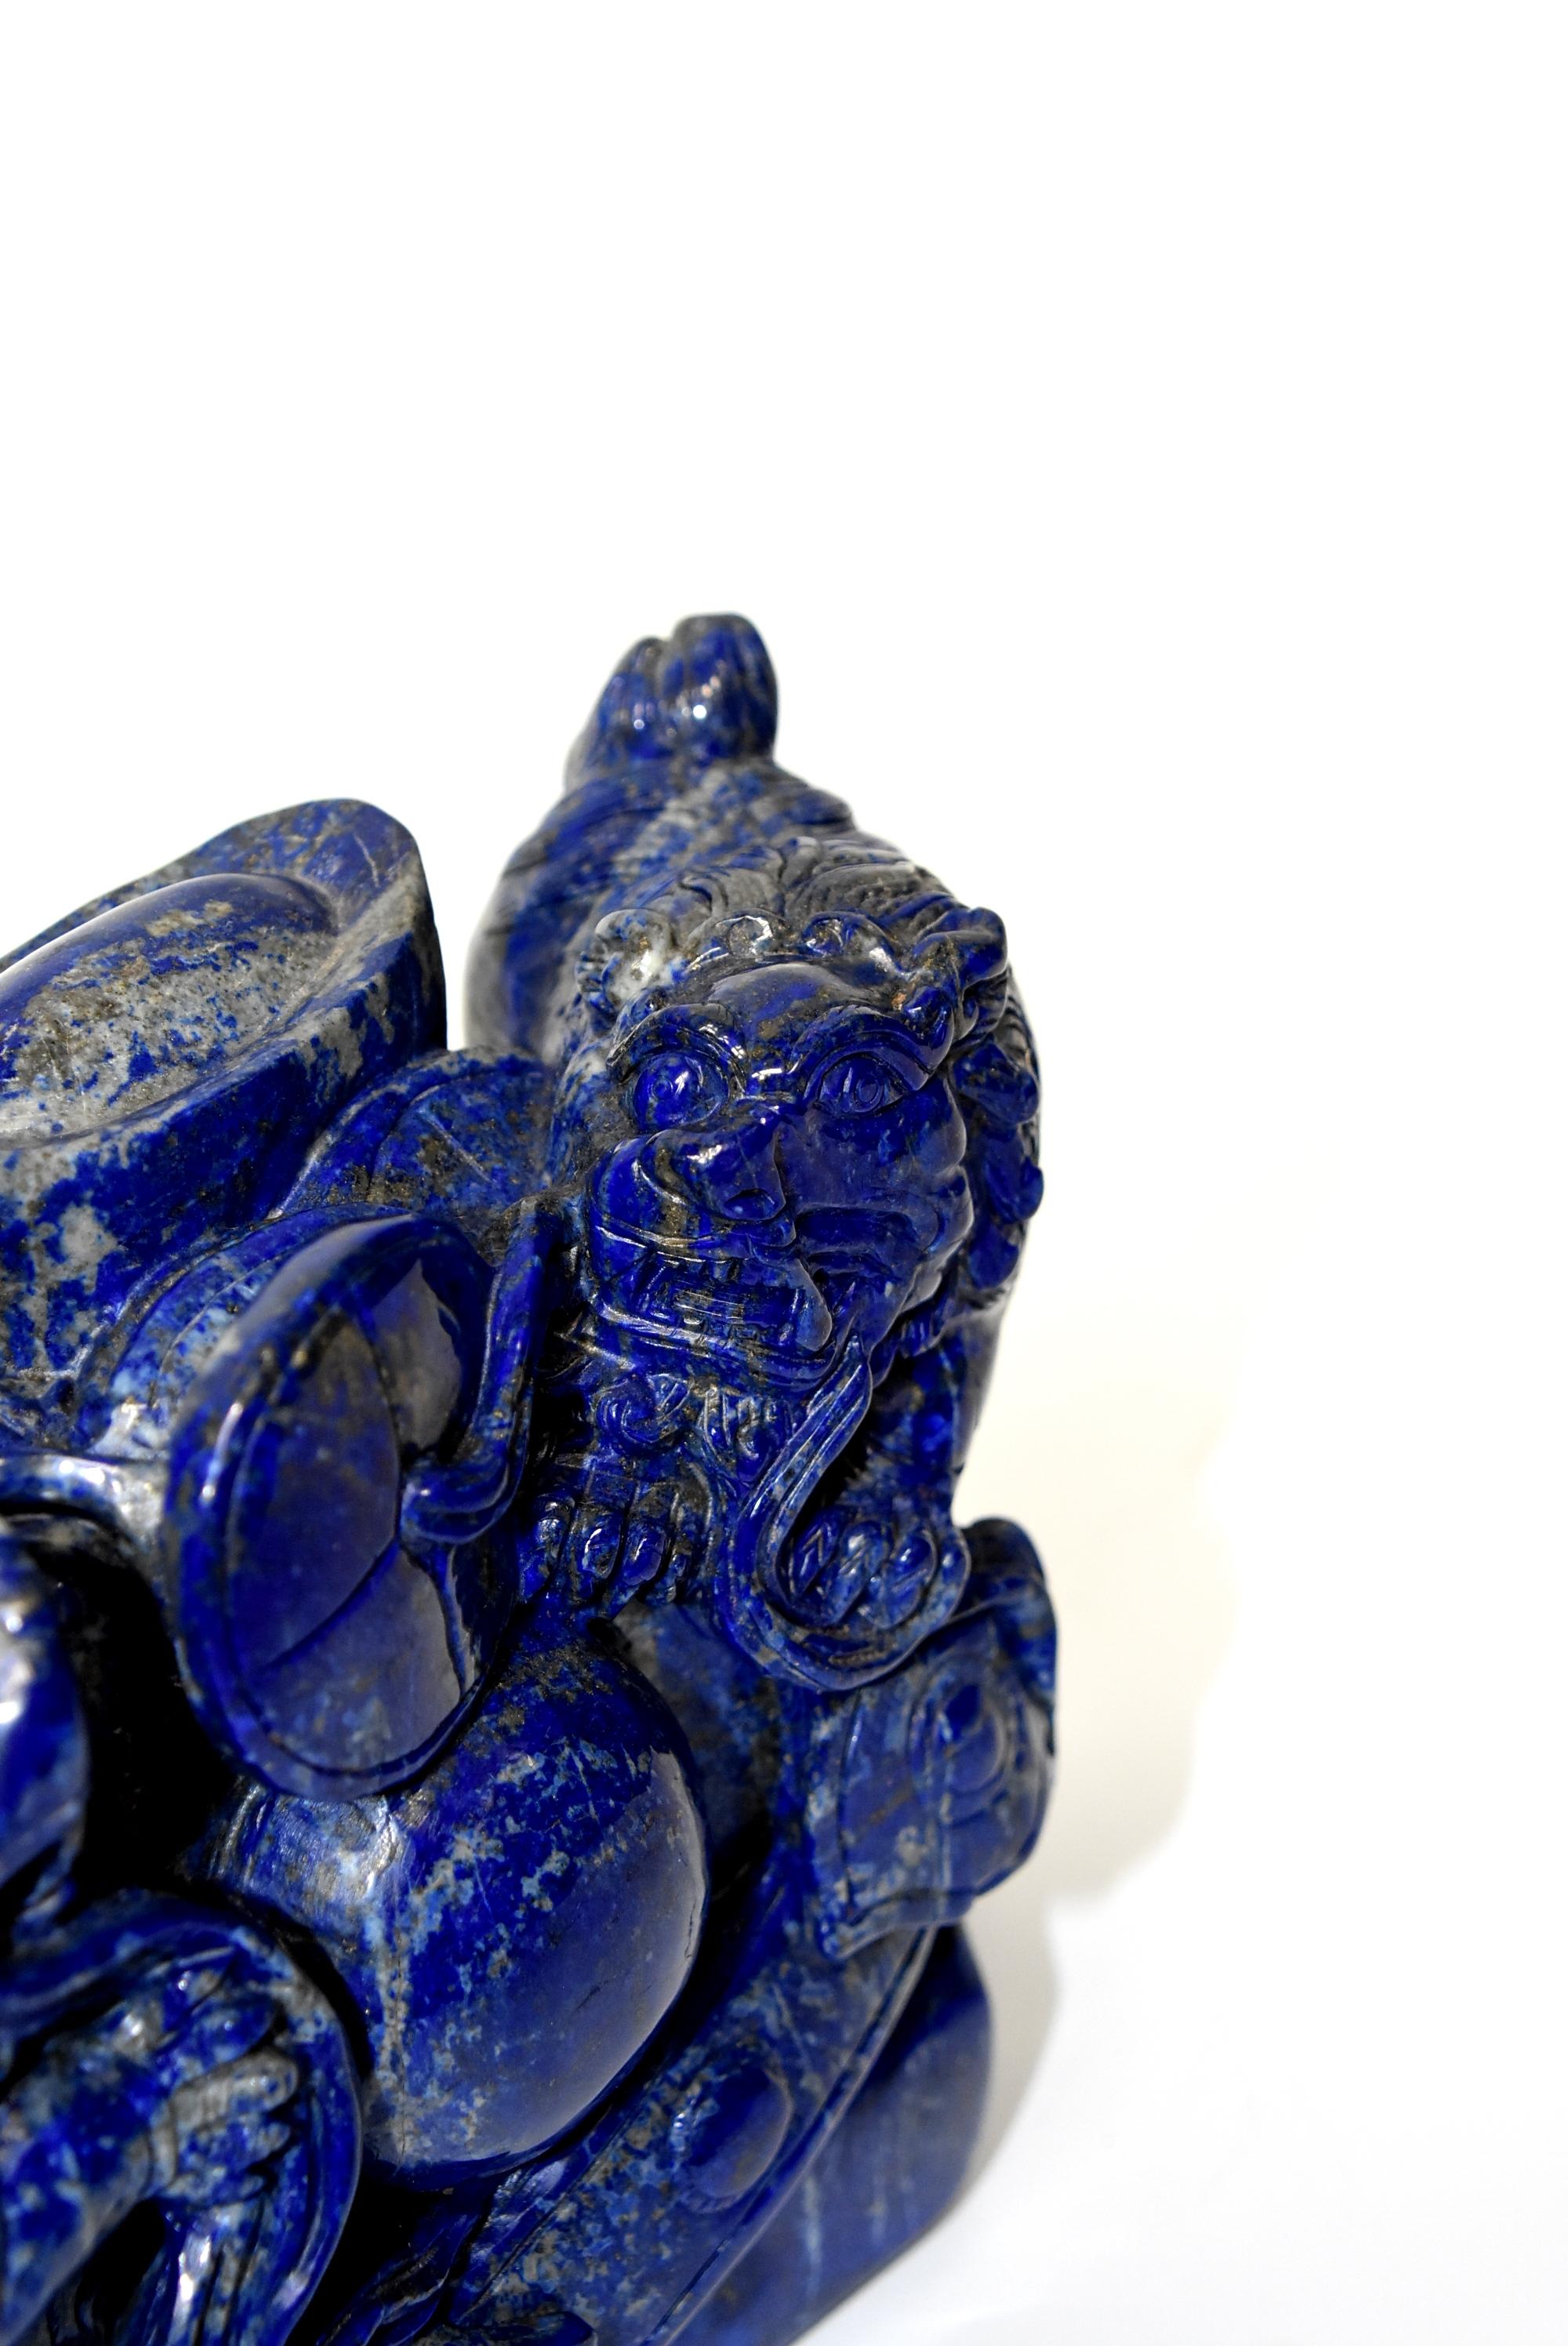 Natural Lapis Lazuli 8 lb Block with Carved Lions 4